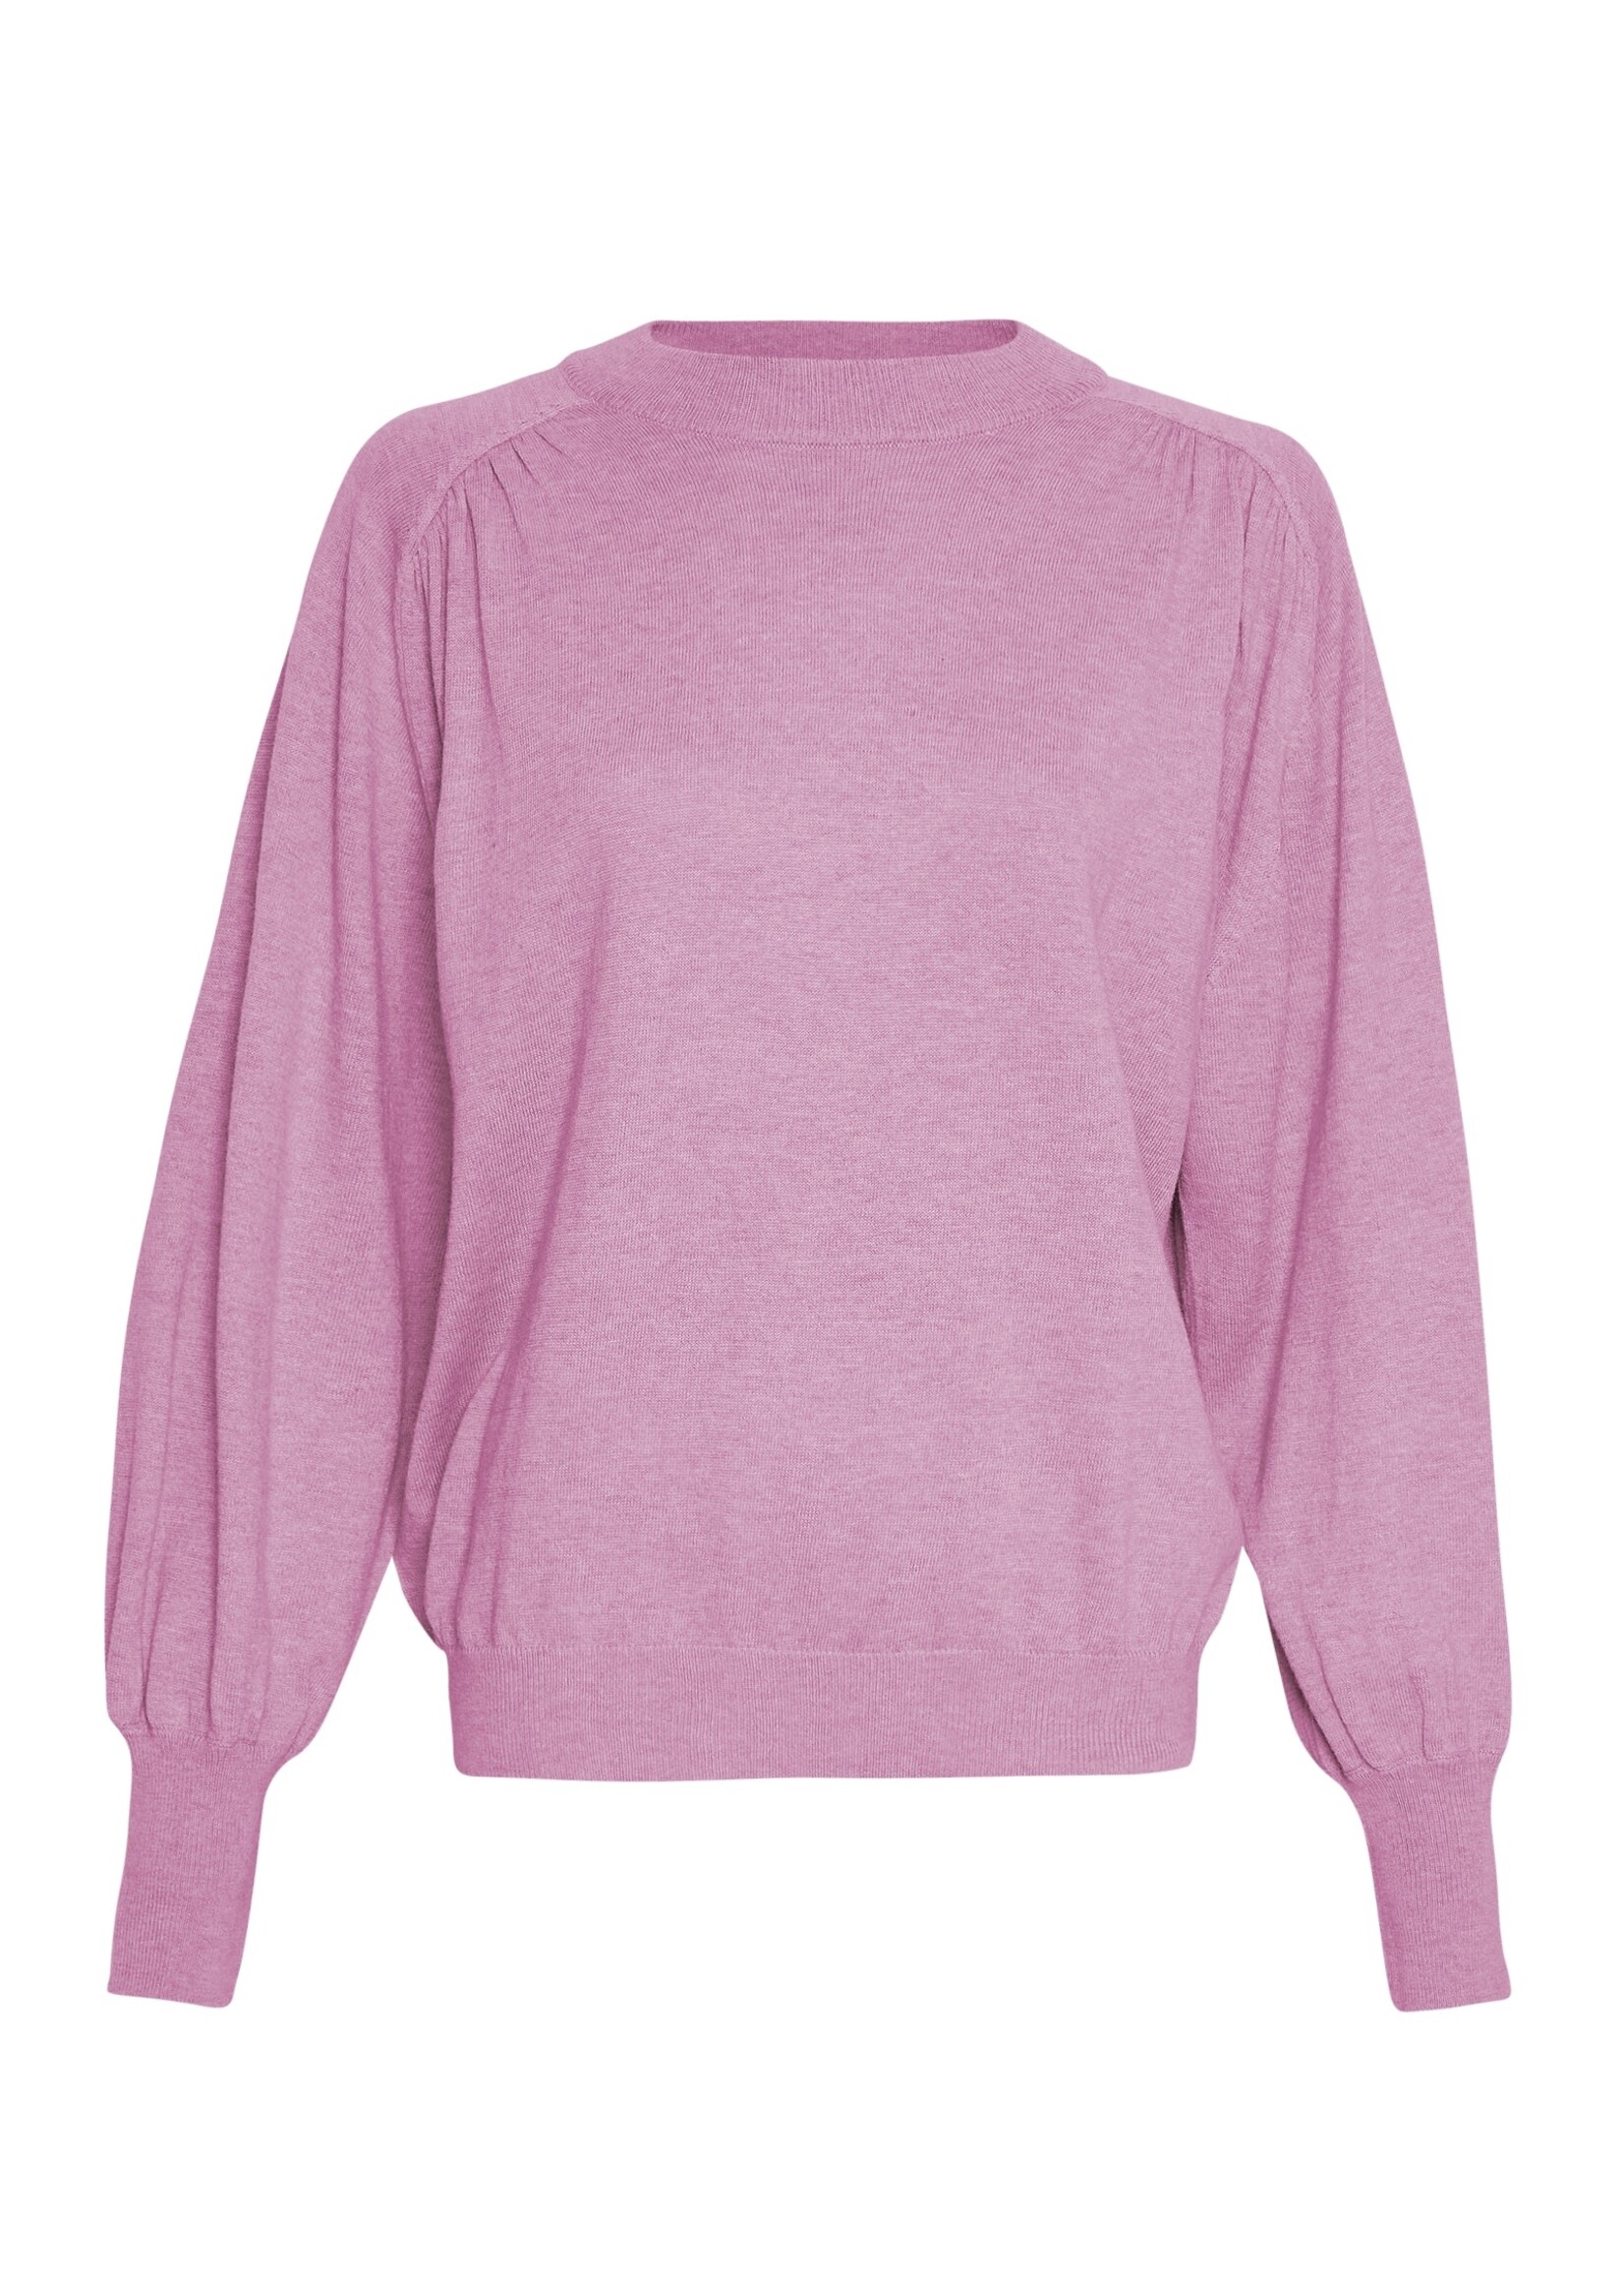 MSCH KAILANI PULLOVER violet tulle